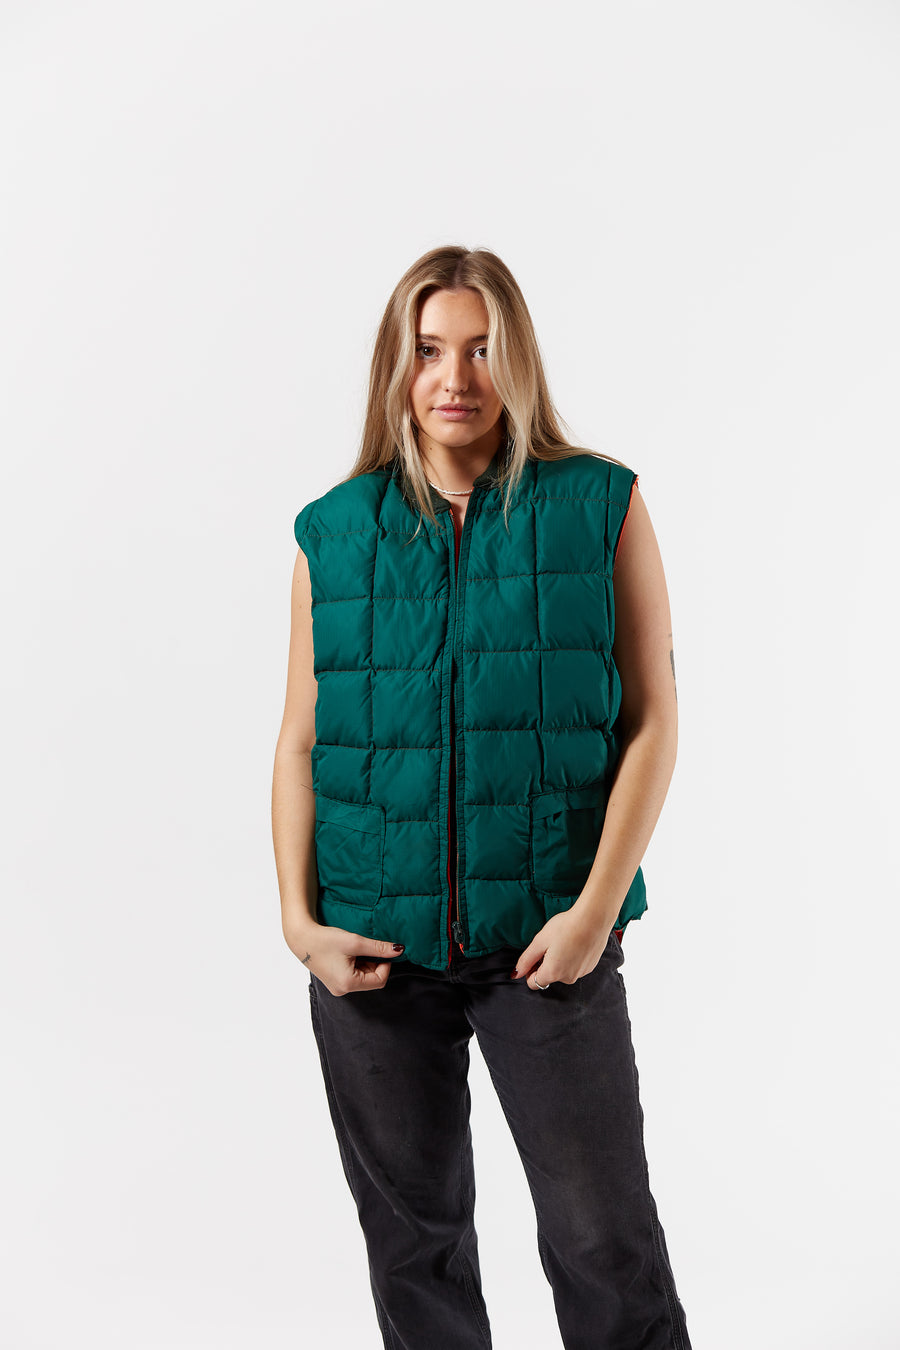 Reversible Puffer Vest in a vintage style from thrift store Twise Studio